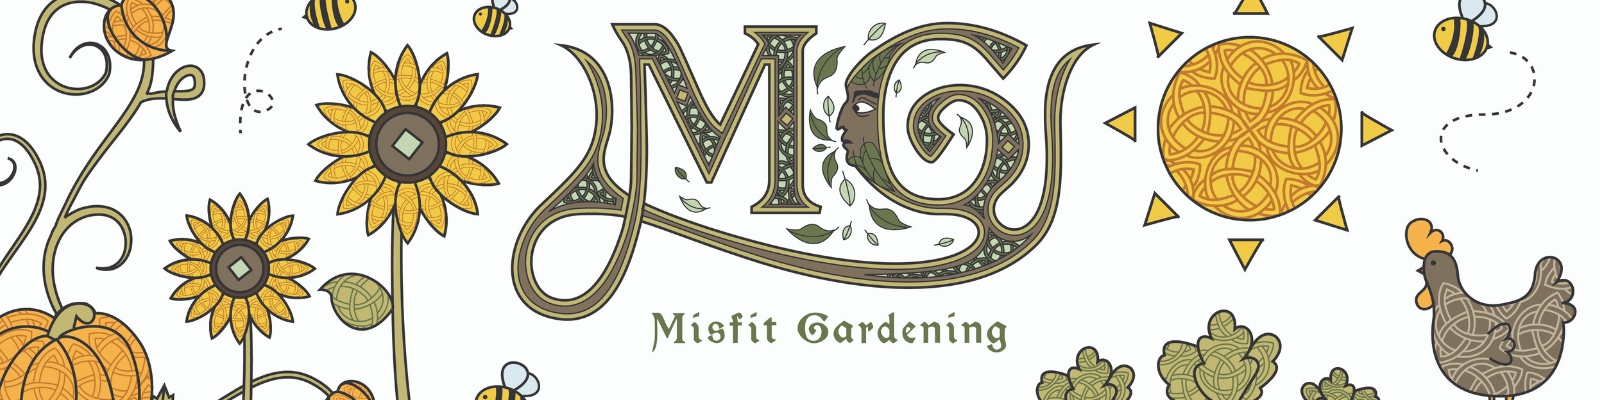 Homesteading & Gardening In The Suburbs With Misfit Gardening